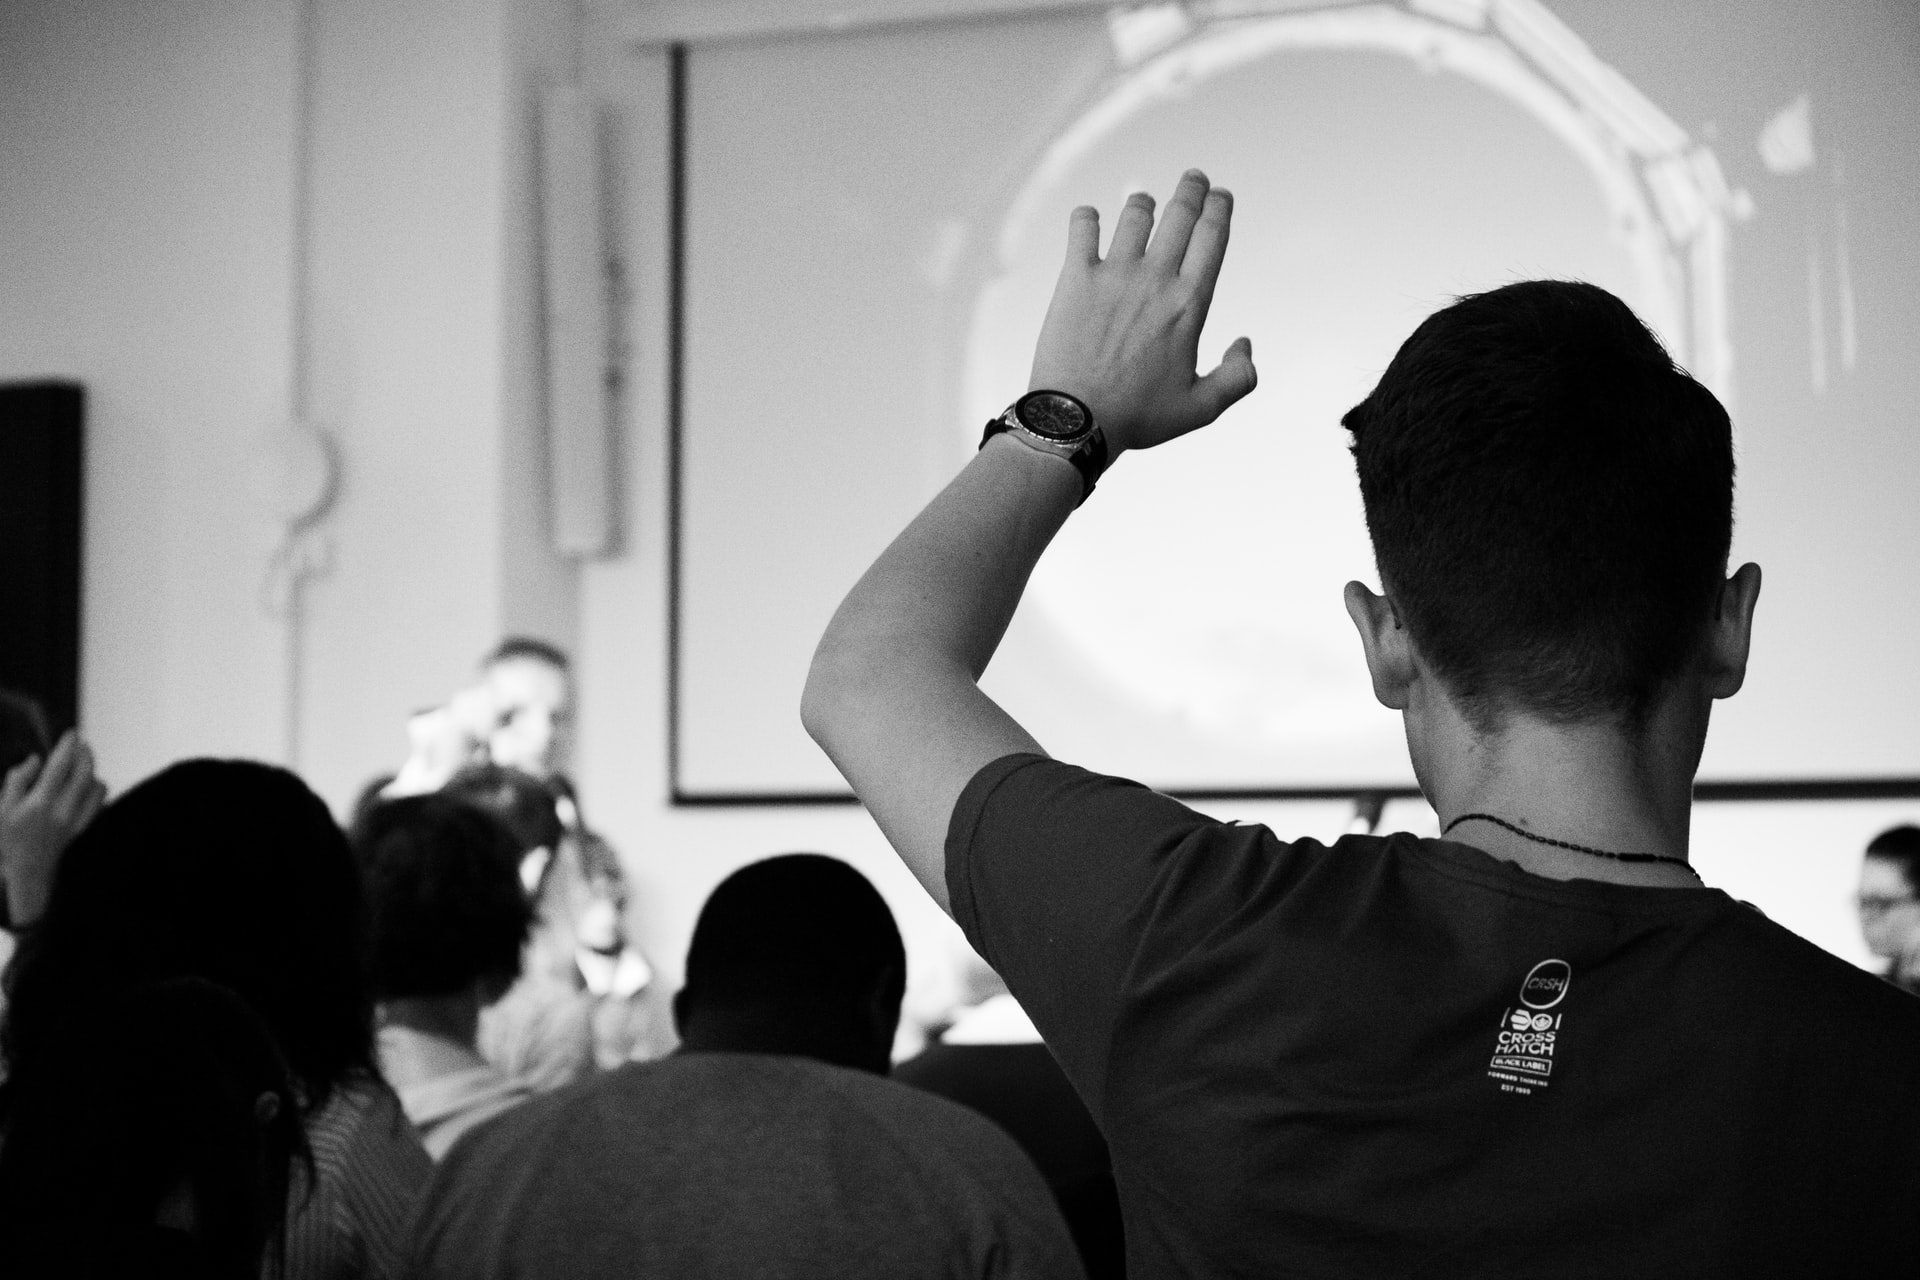 Black and white photo set in a classroom. The student in front of you is raising their hand.